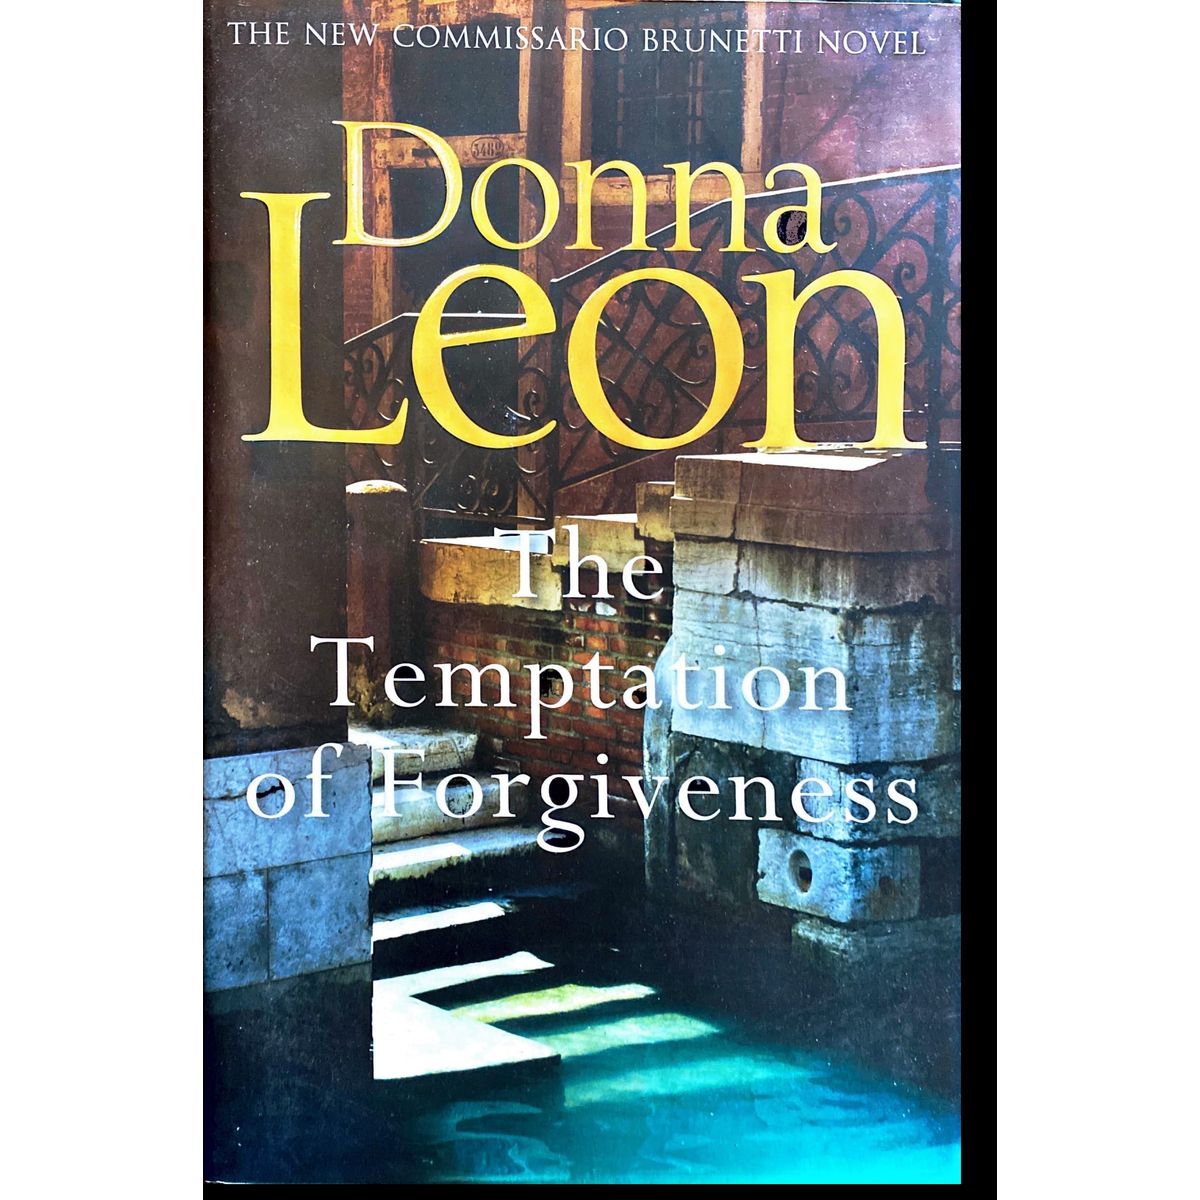 ISBN: 9781785151965 / 1785151967 - The Temptation of Forgiveness by Donna Leon [2018]8